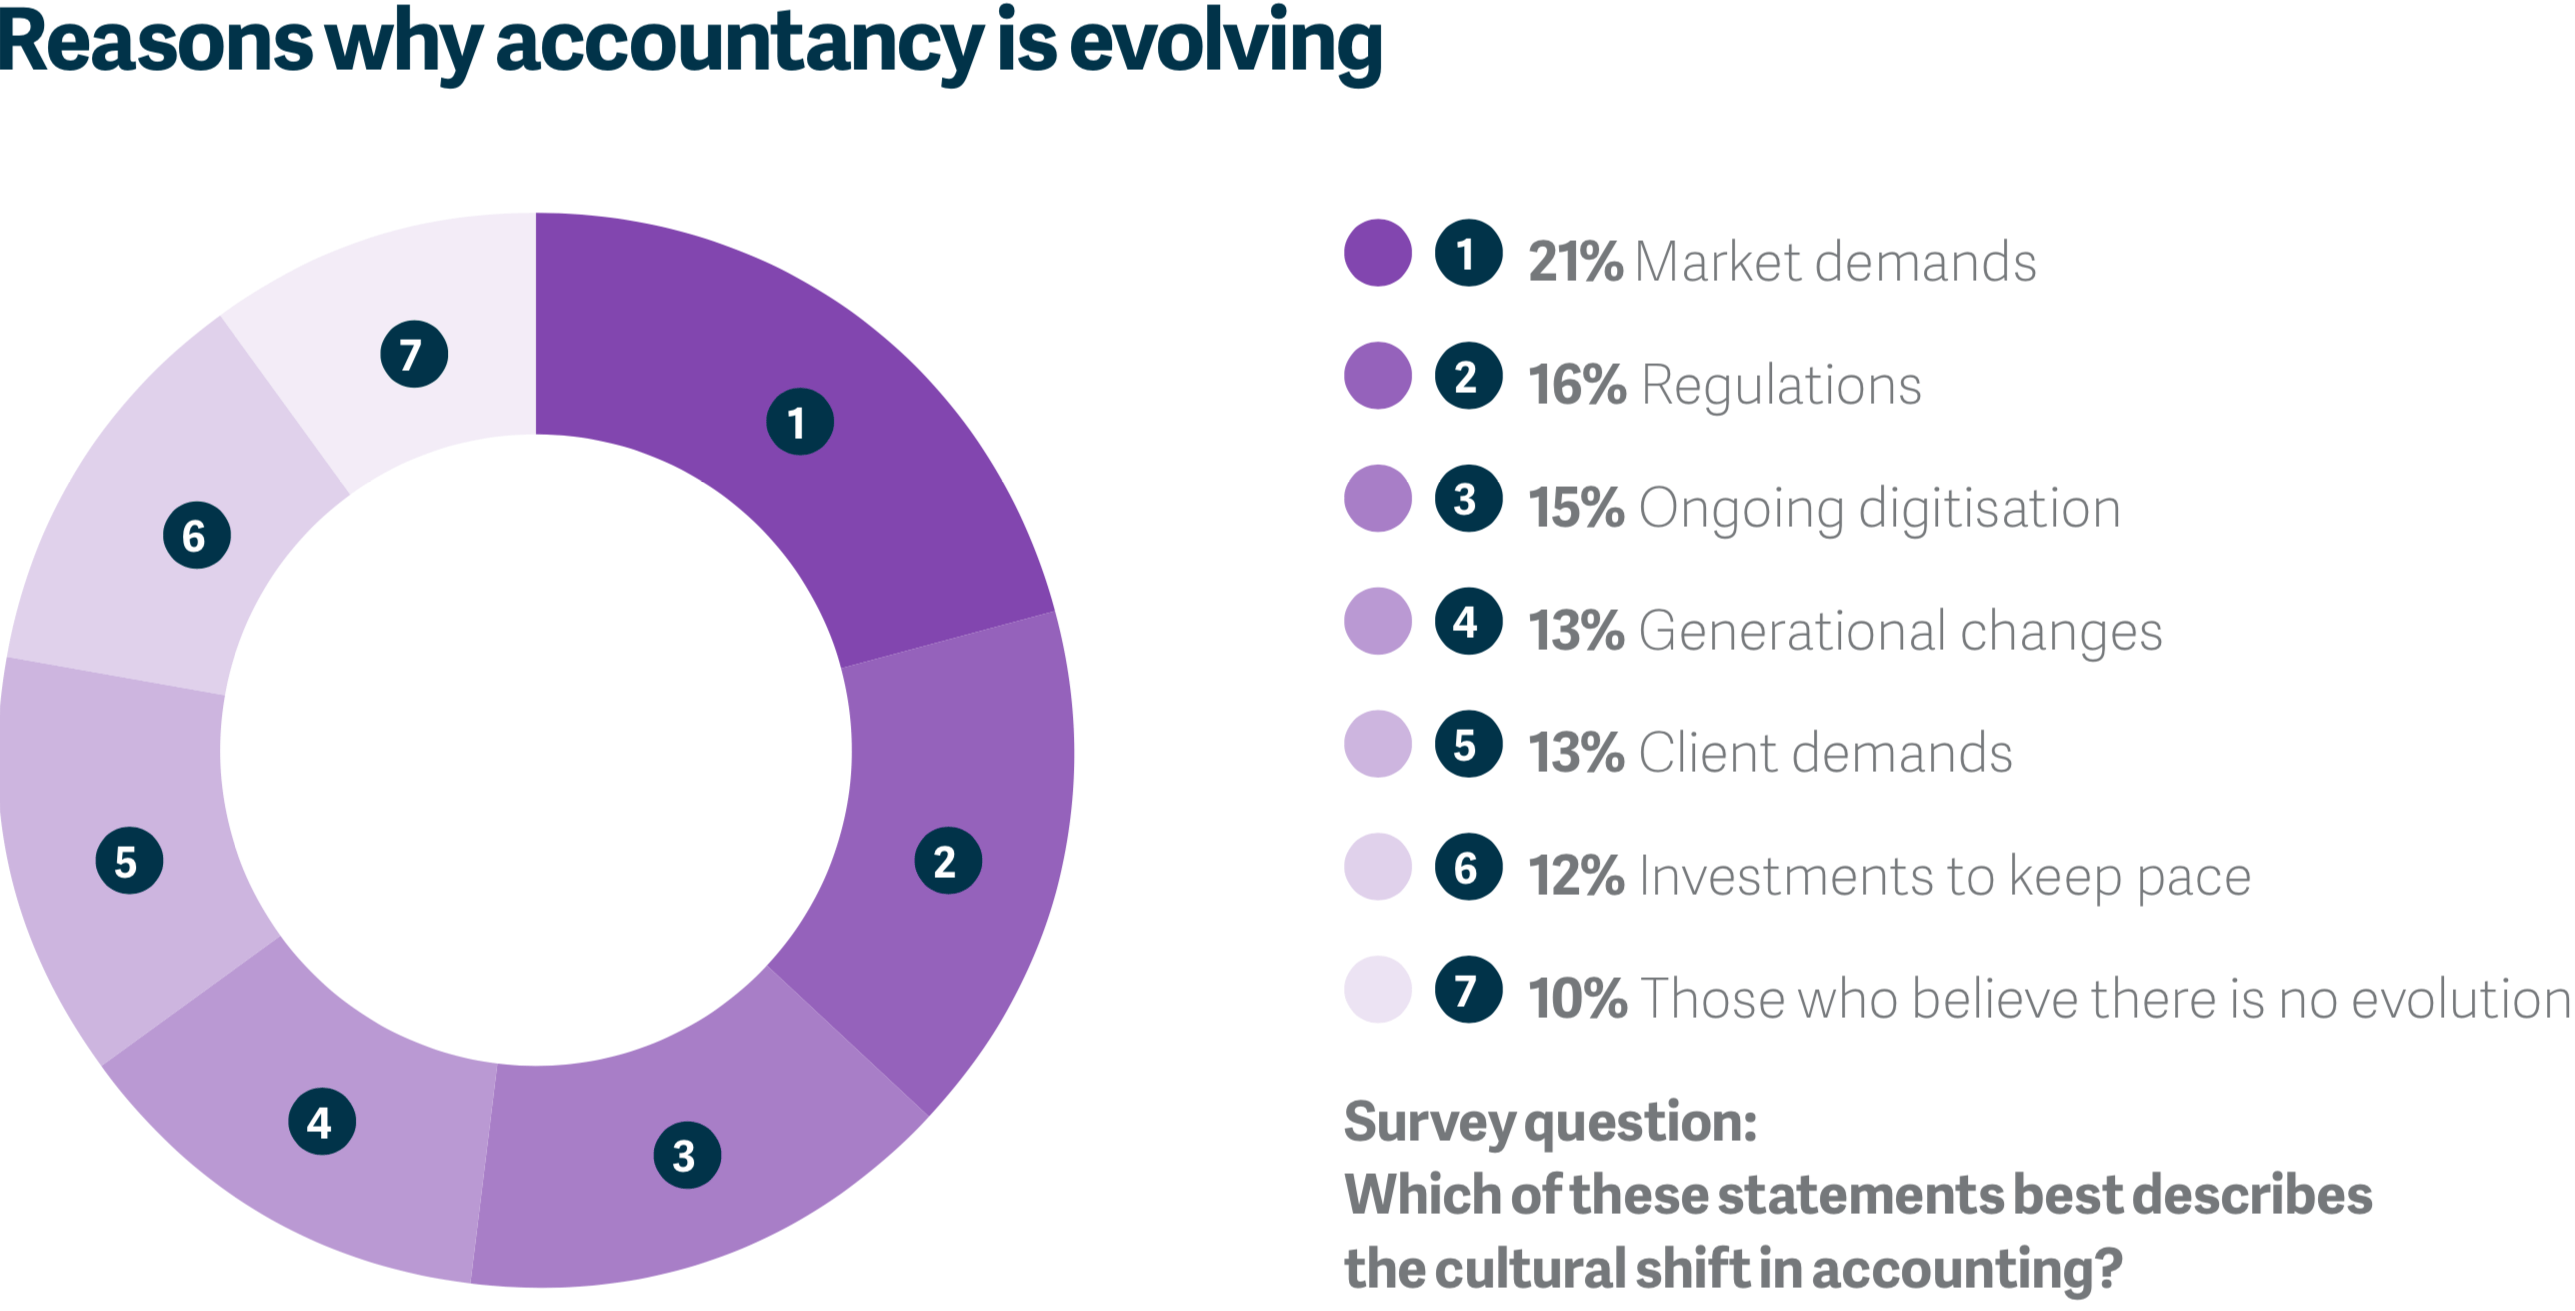 Reasons why accountancy is evolving